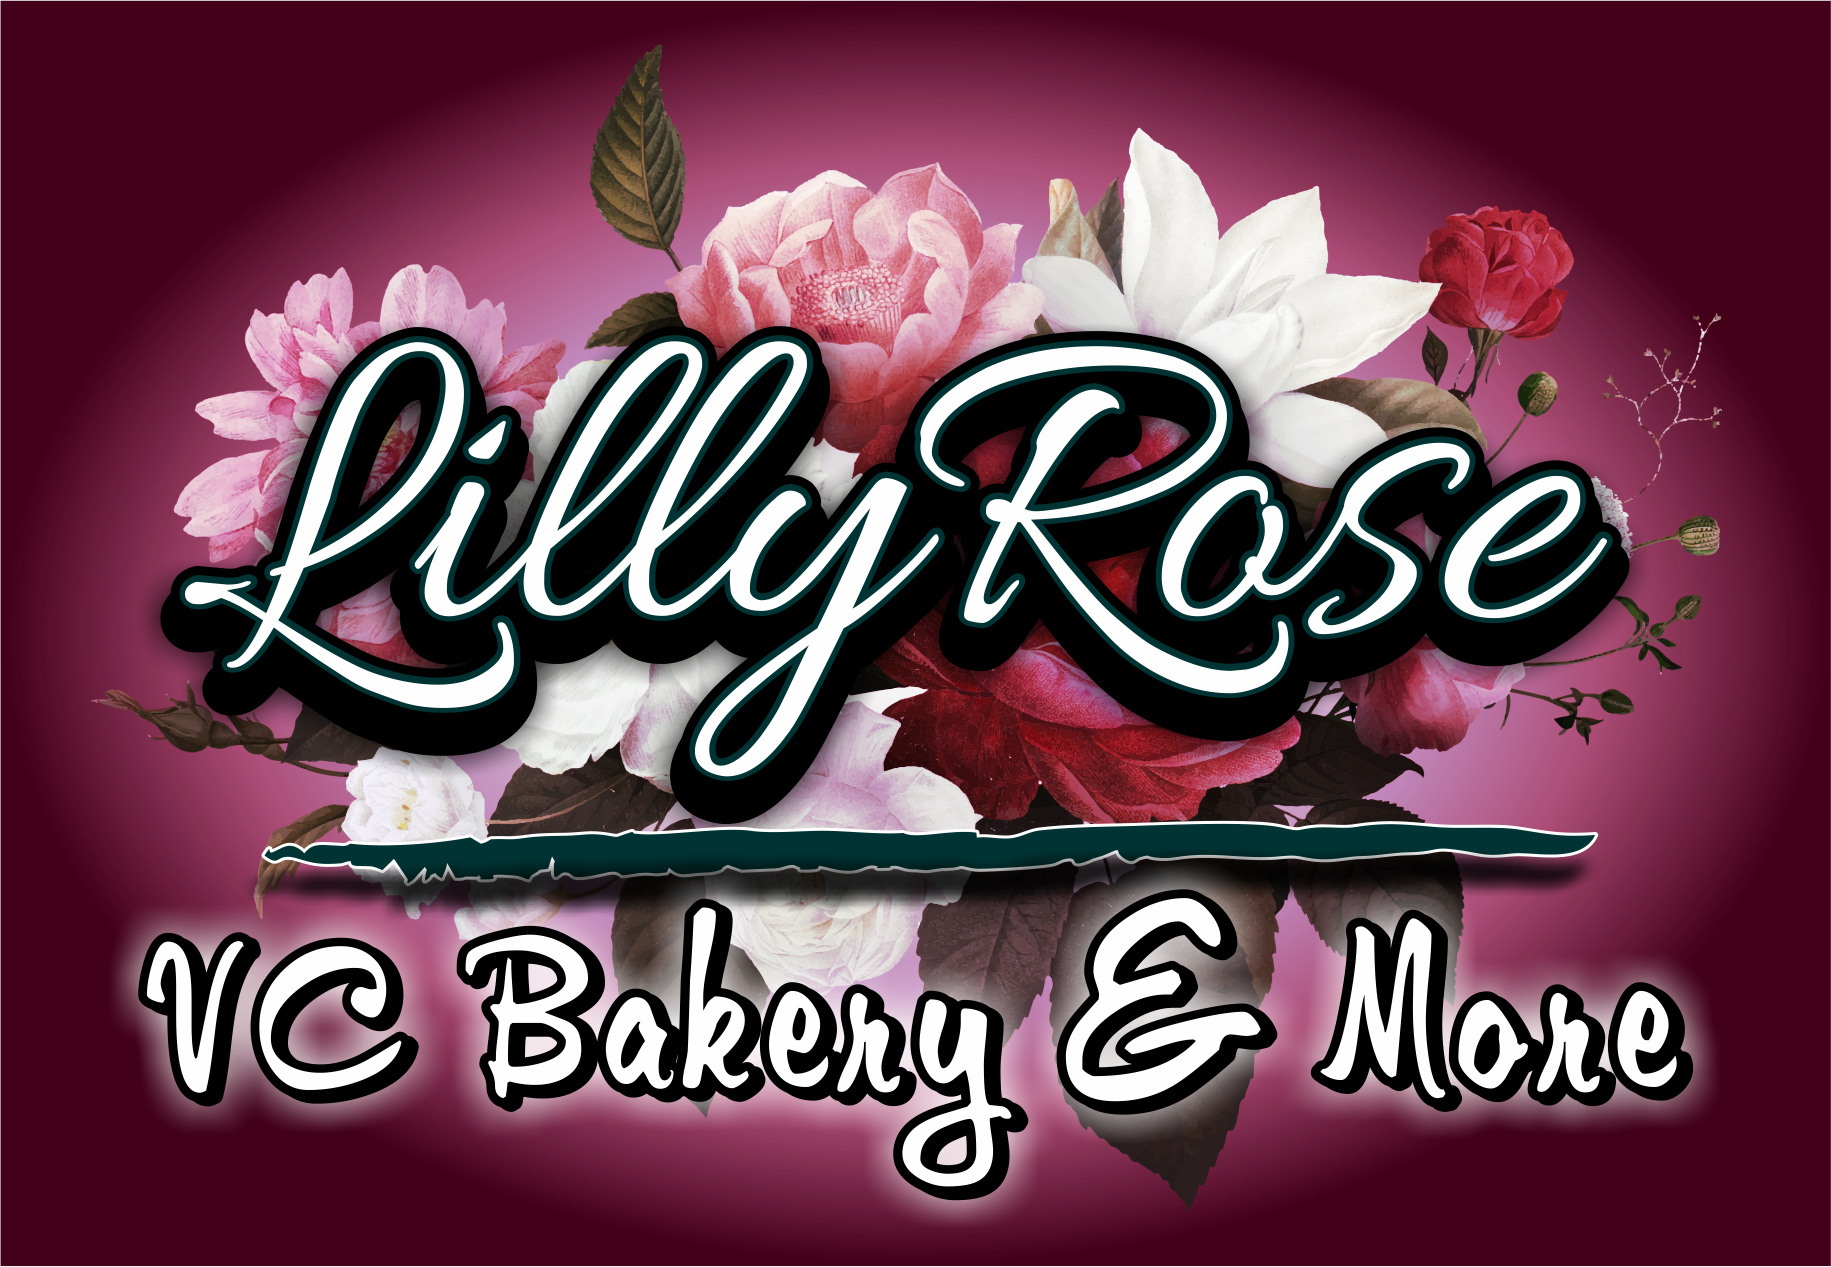 LillyRose VC Bakery & More food truck profile image